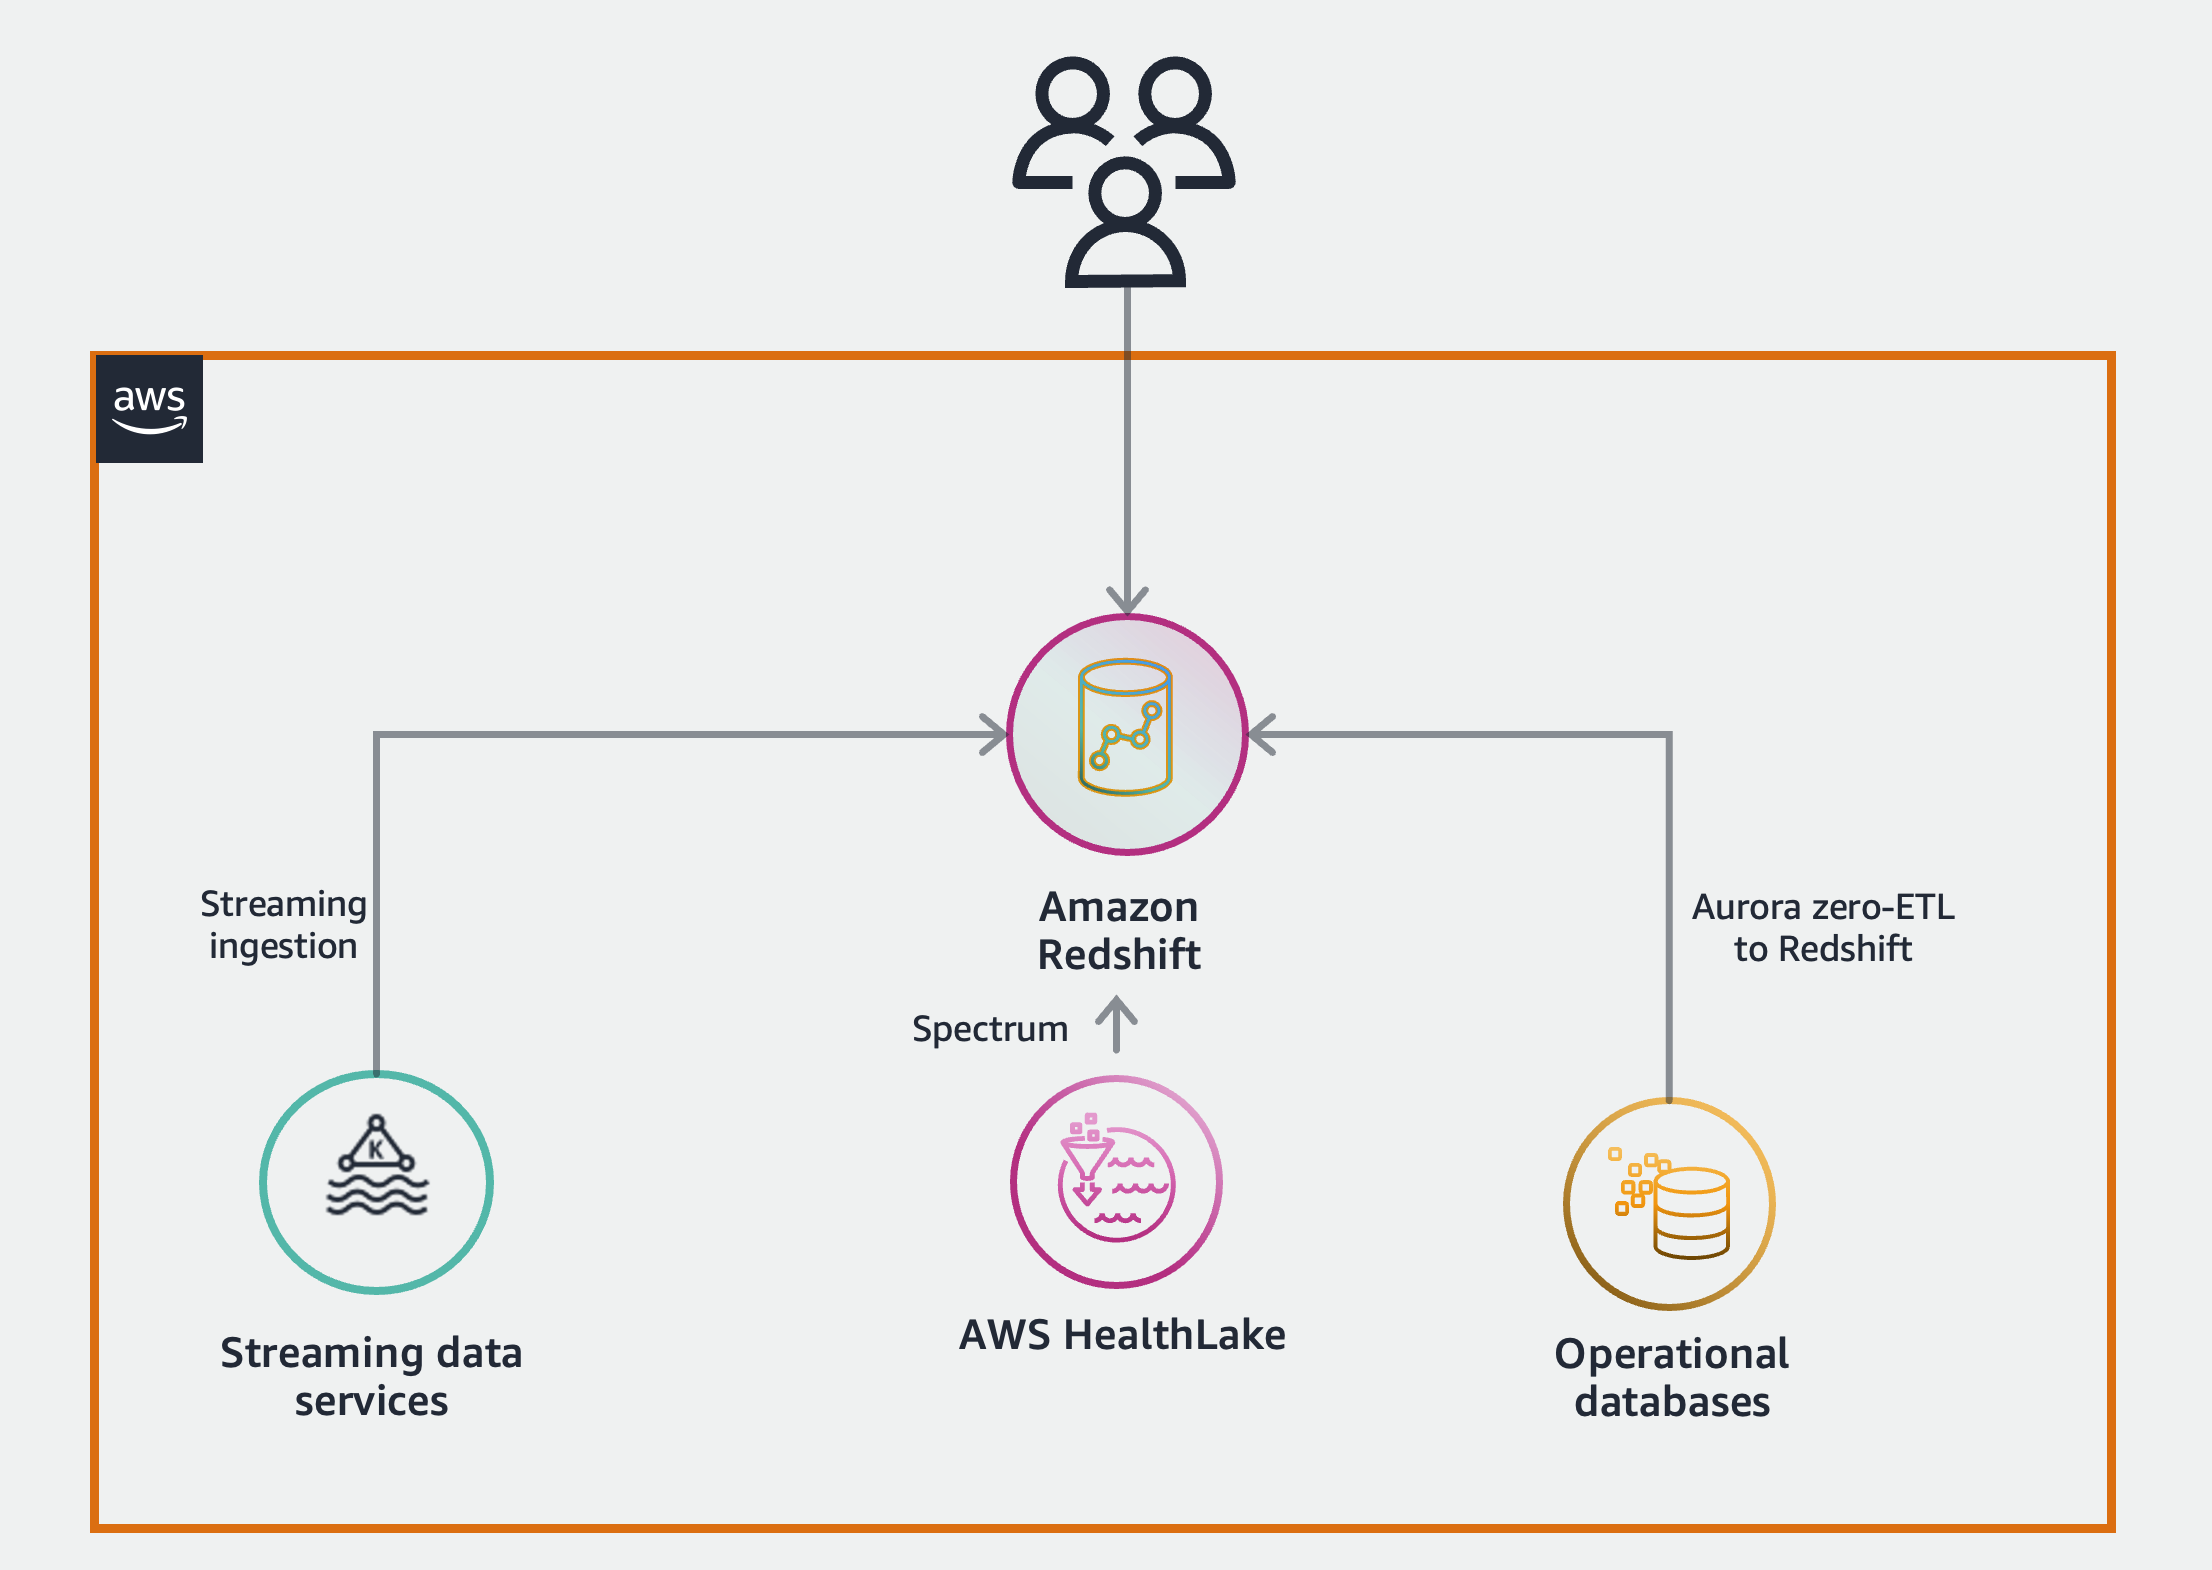 Improve healthcare services through patient 360: A zero-ETL approach to enable near real-time data analytics | Amazon Web Services